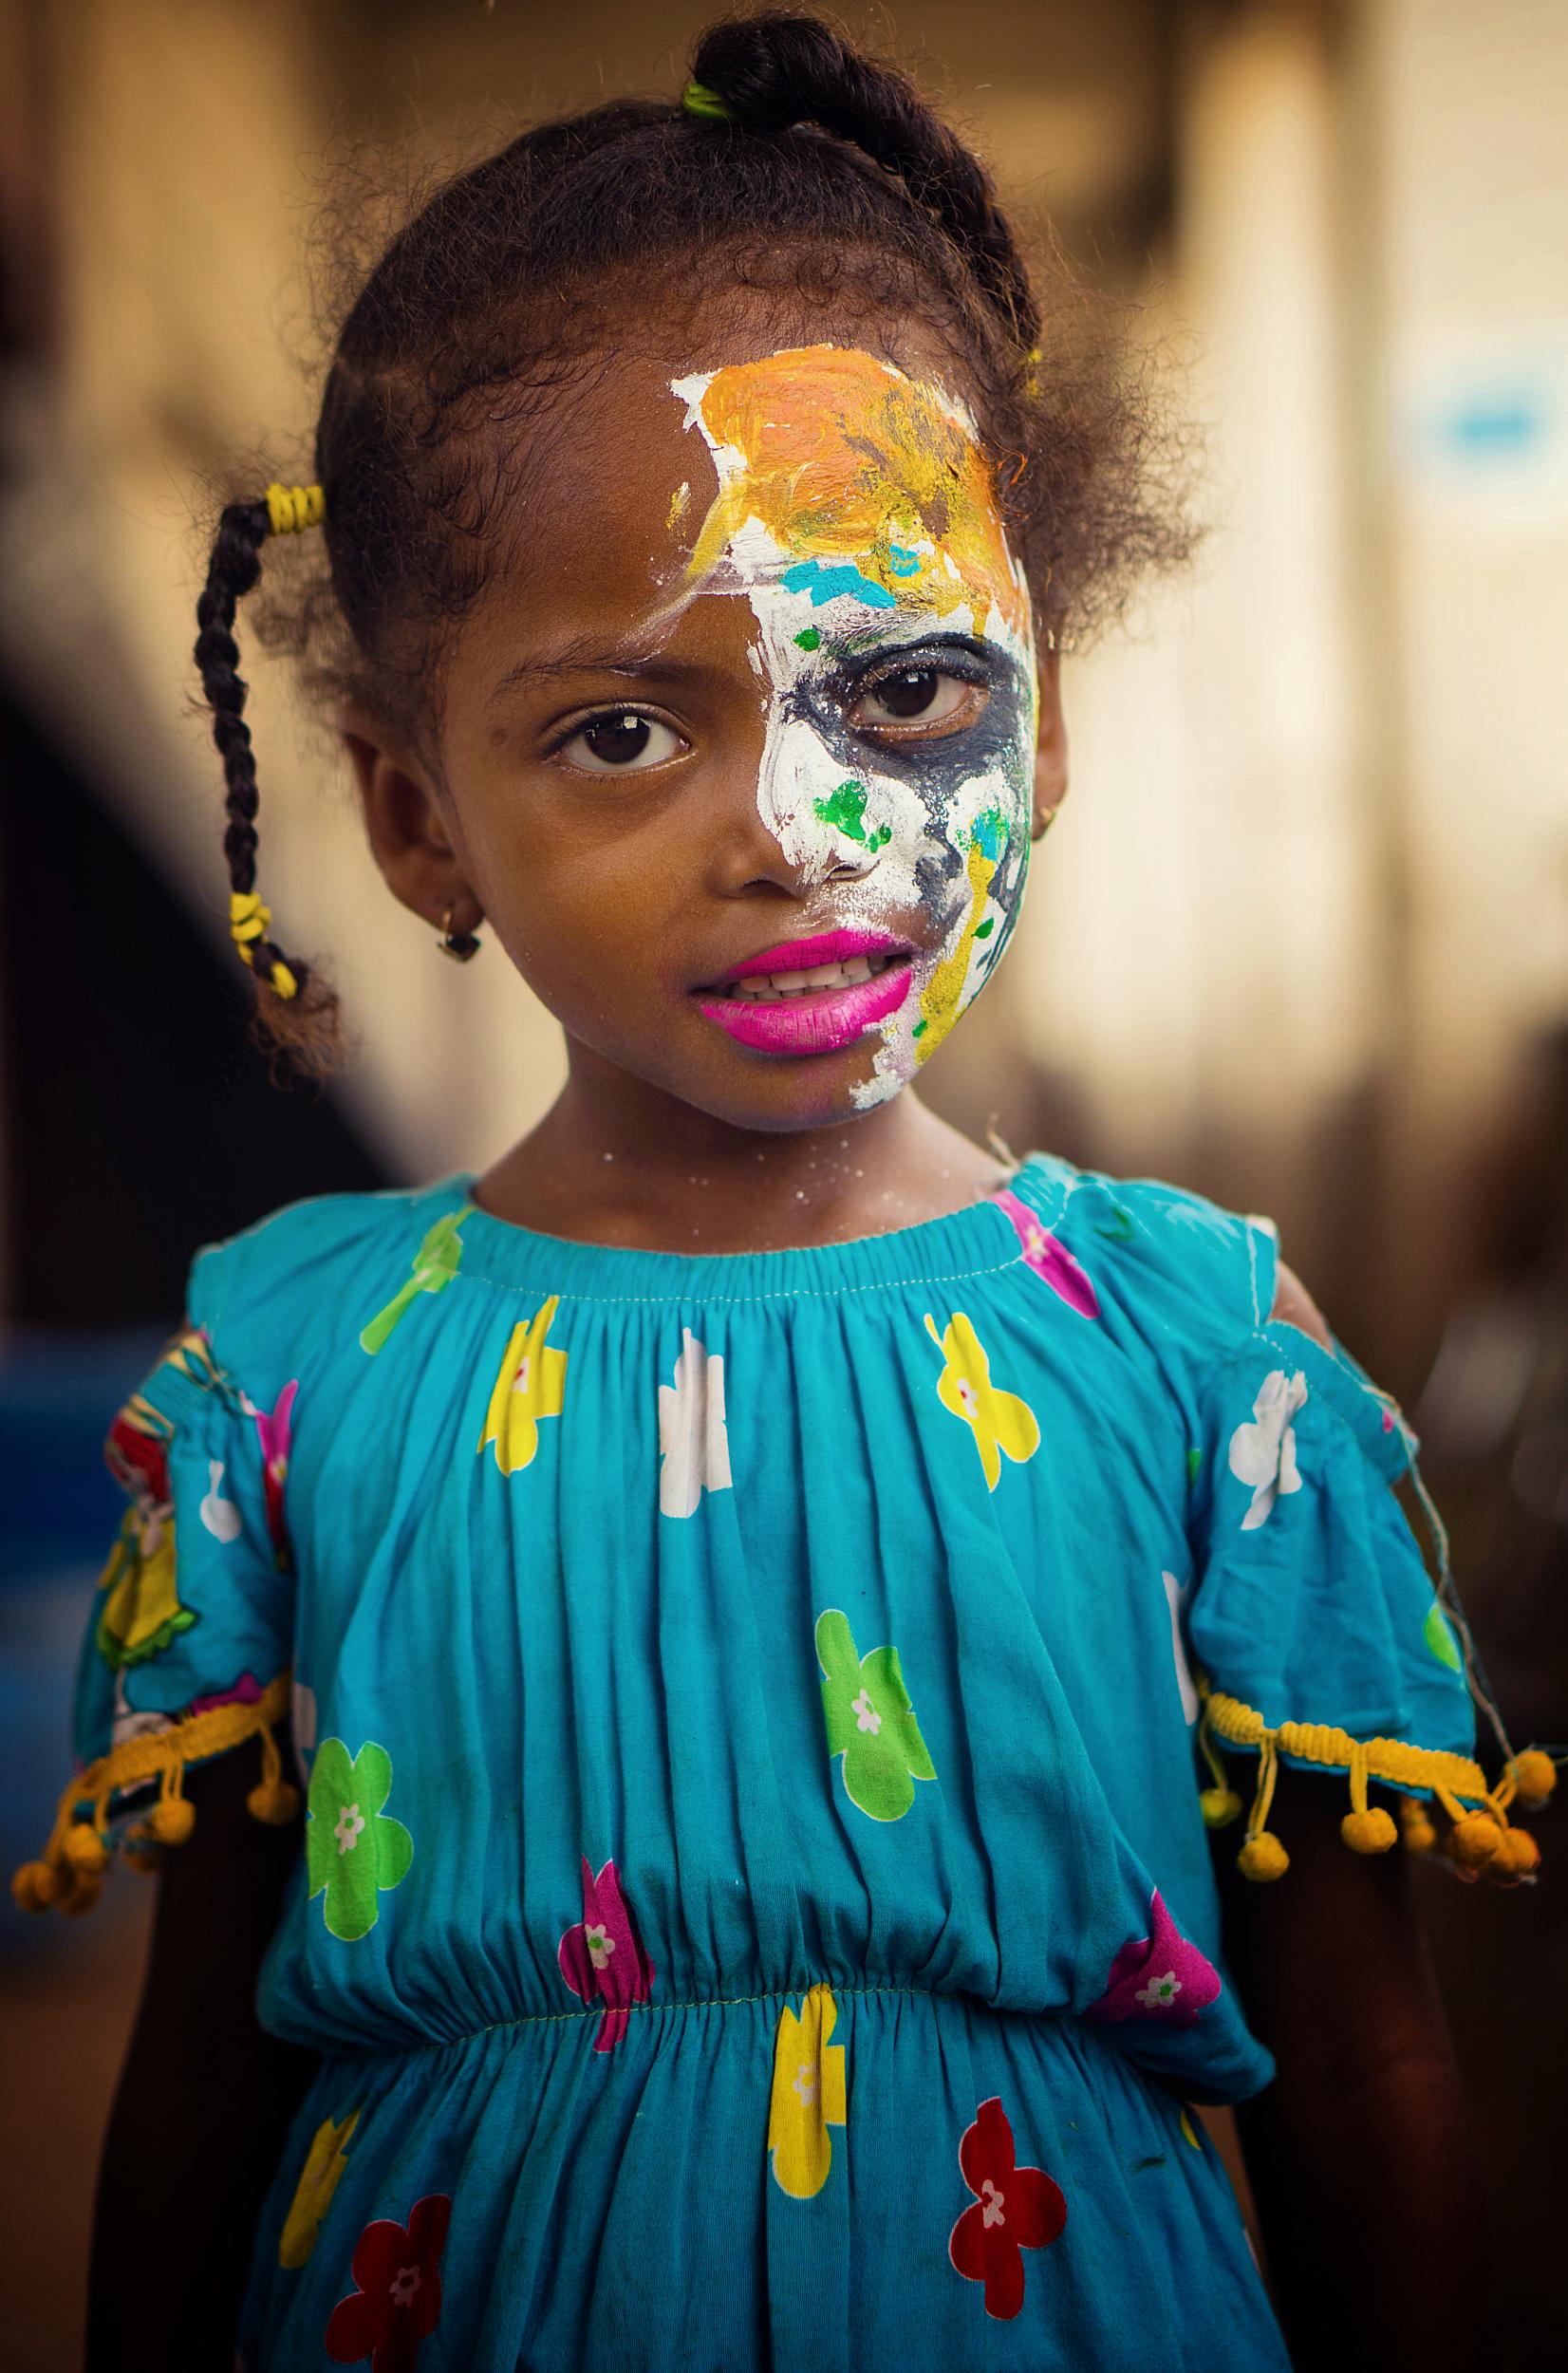 A four-year-old girl poses for a picture in a camp for internally displaced people in Yemen. She came to this camp with her family after fleeing the war in their home in Al-Hodaieda governorate. She has a friend in the camp who loves face-painting the other children. With no schooling available to them, the children find creative ways to pass their time and make small amounts of money where they can